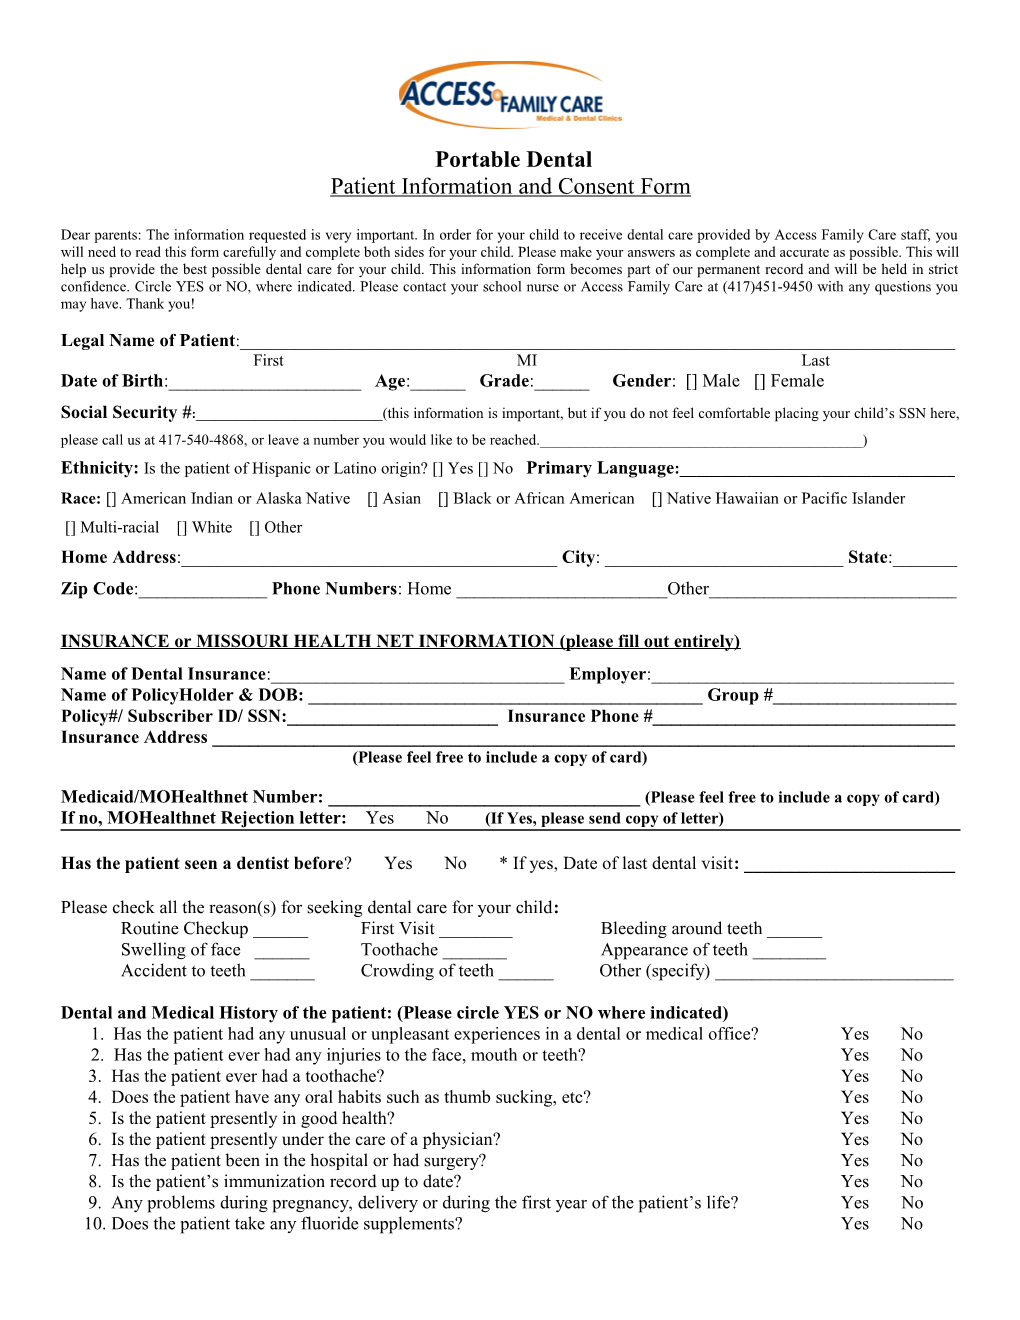 Patient Information and Consent Form